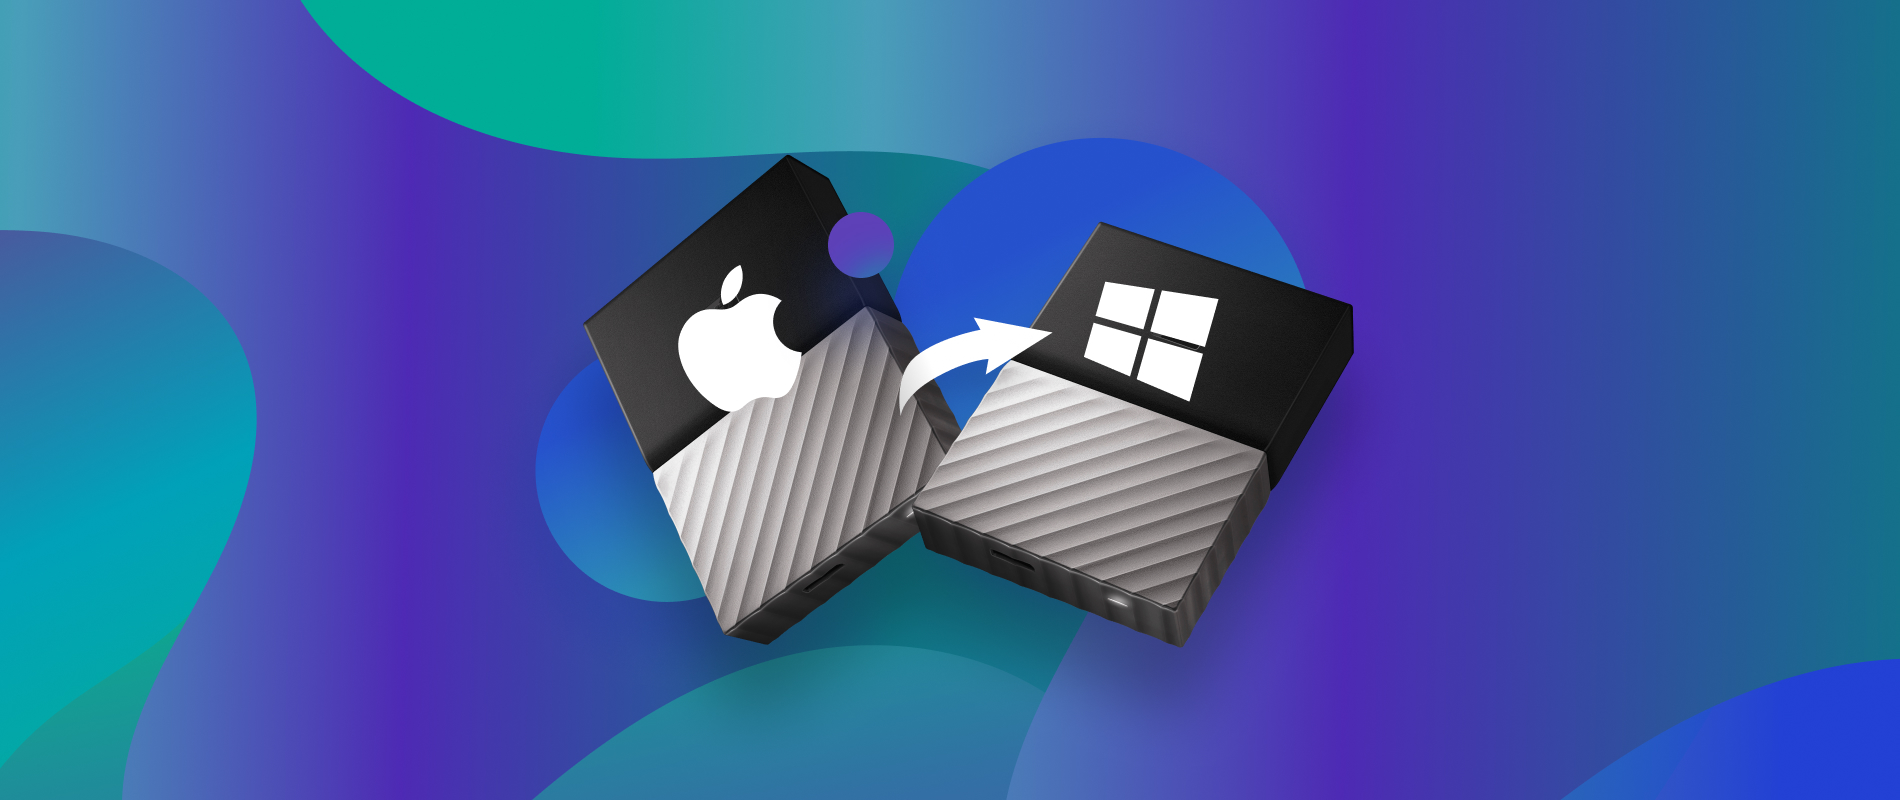 How to Convert Mac Hard Drive to Windows Without Losing